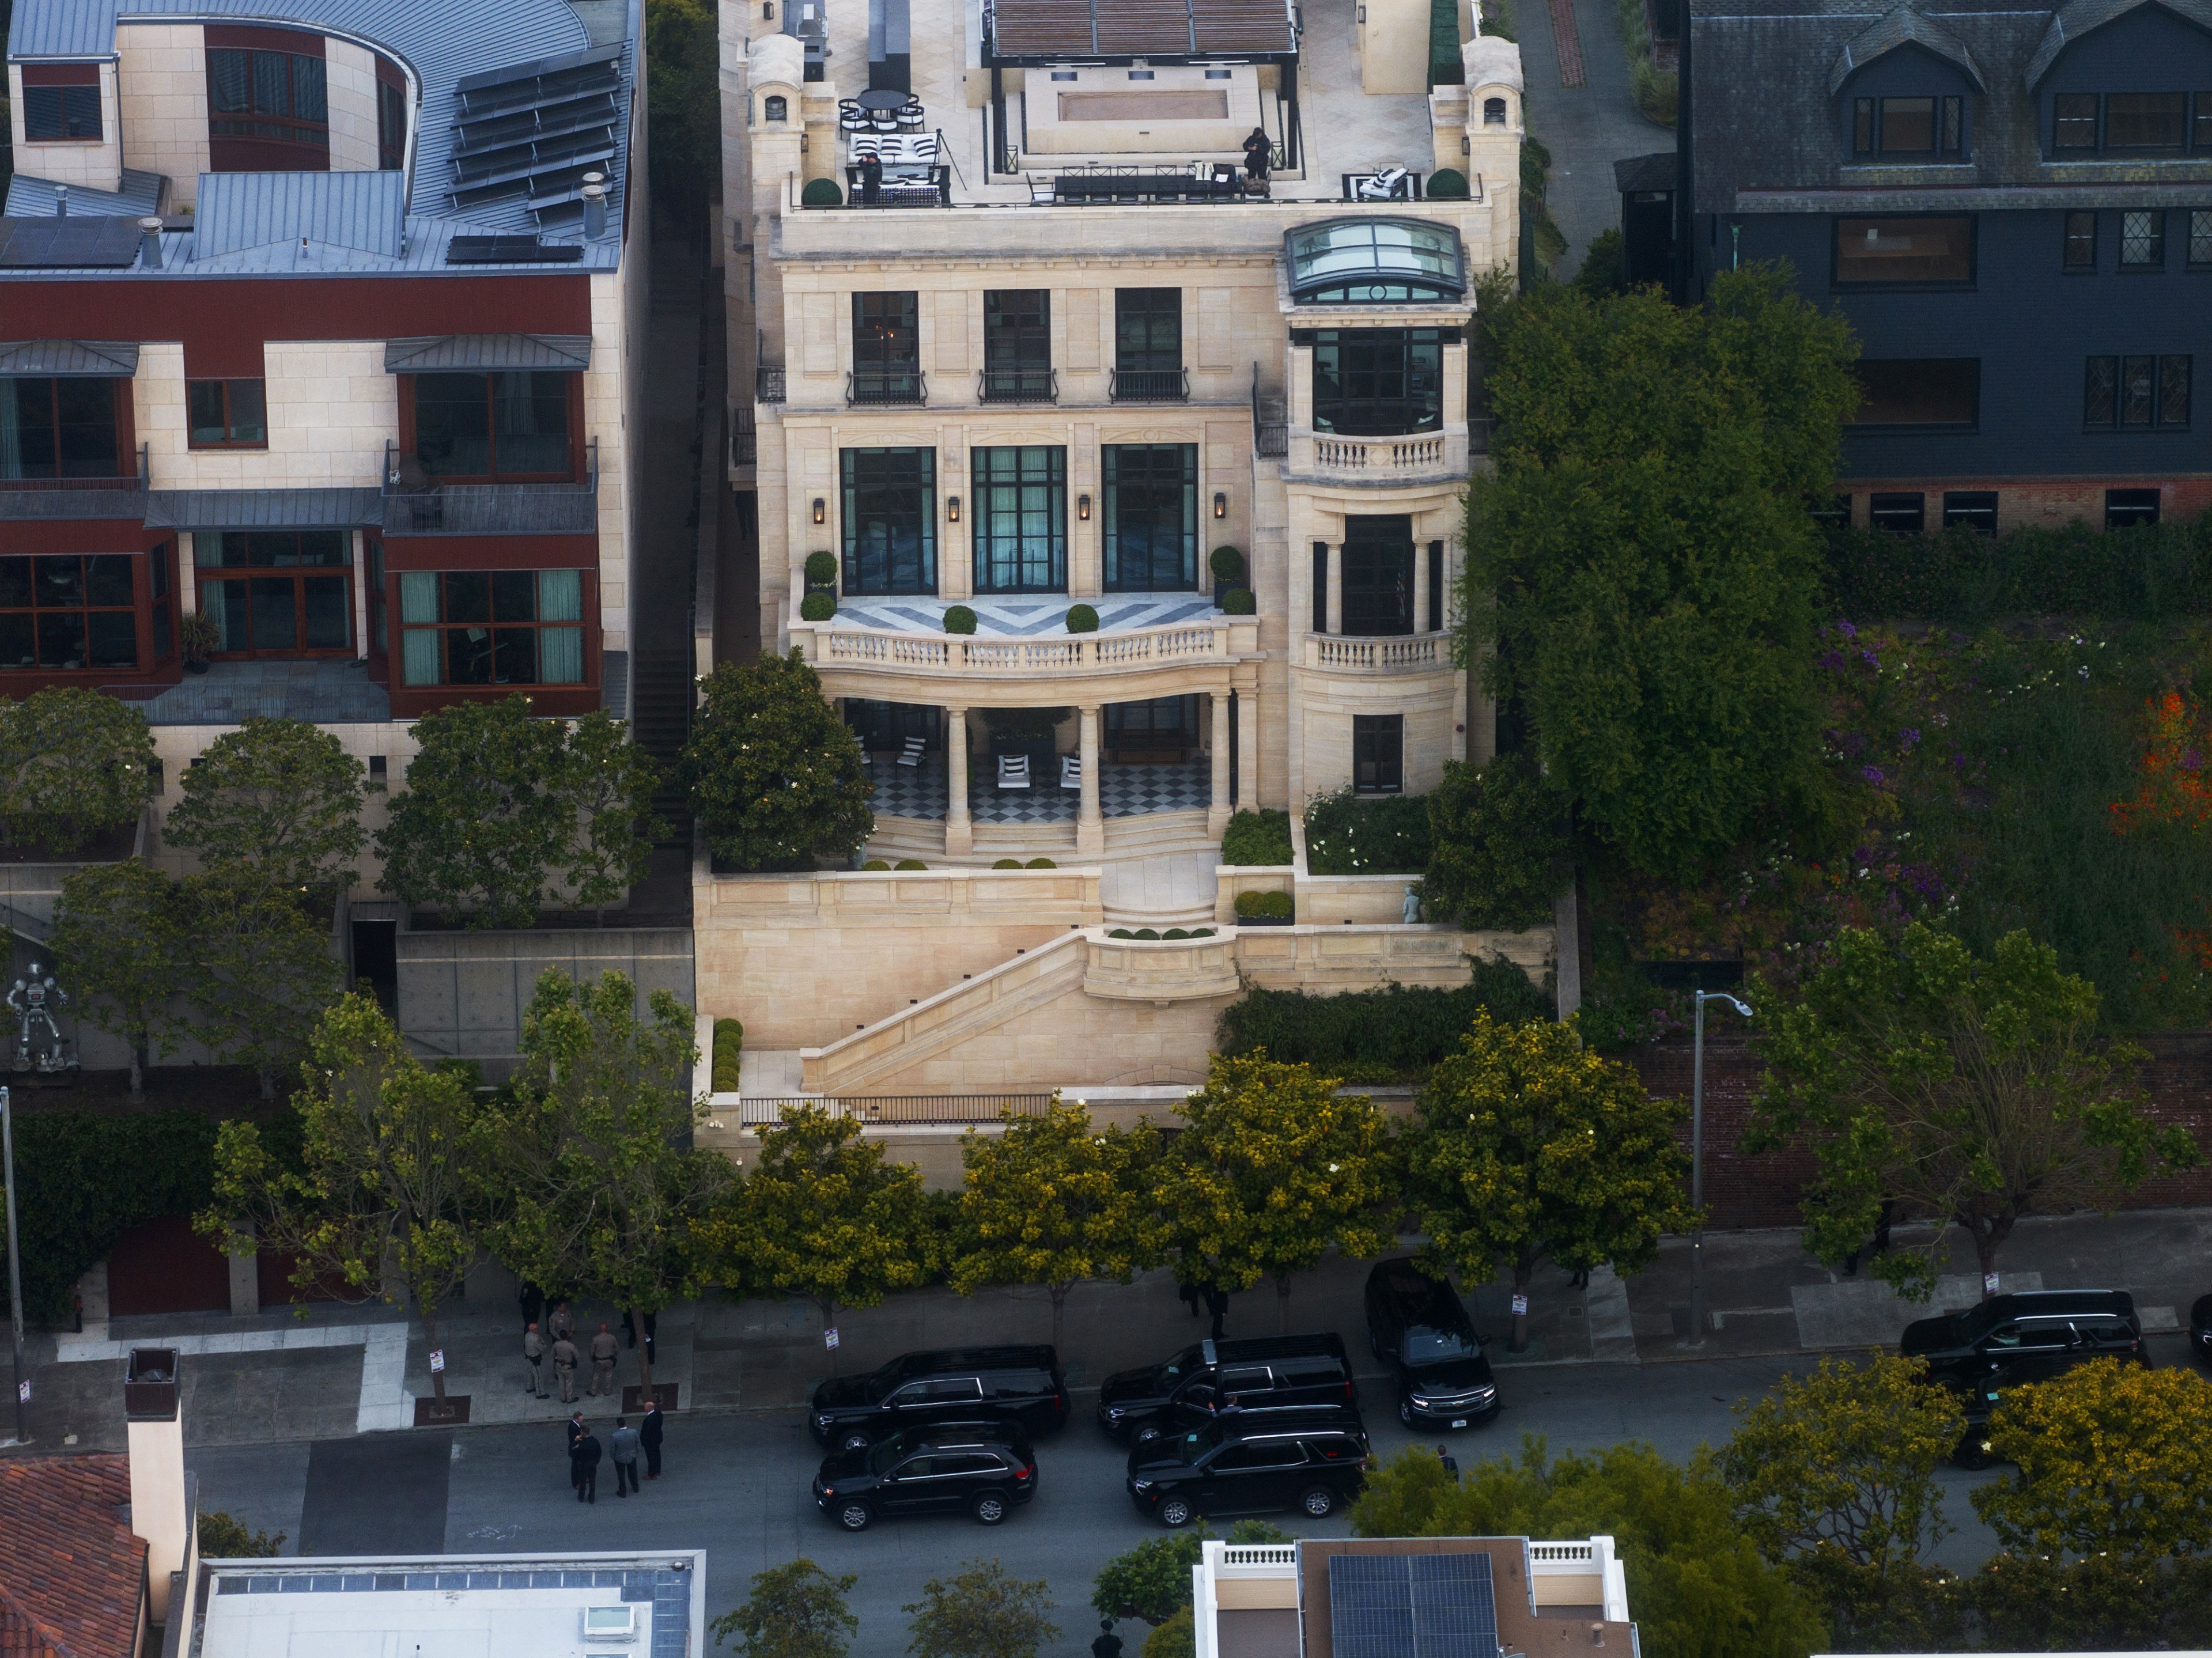 An aerial view of a grand beige mansion with a rooftop terrace, lush greenery, and several black cars parked on a tree-lined street below.